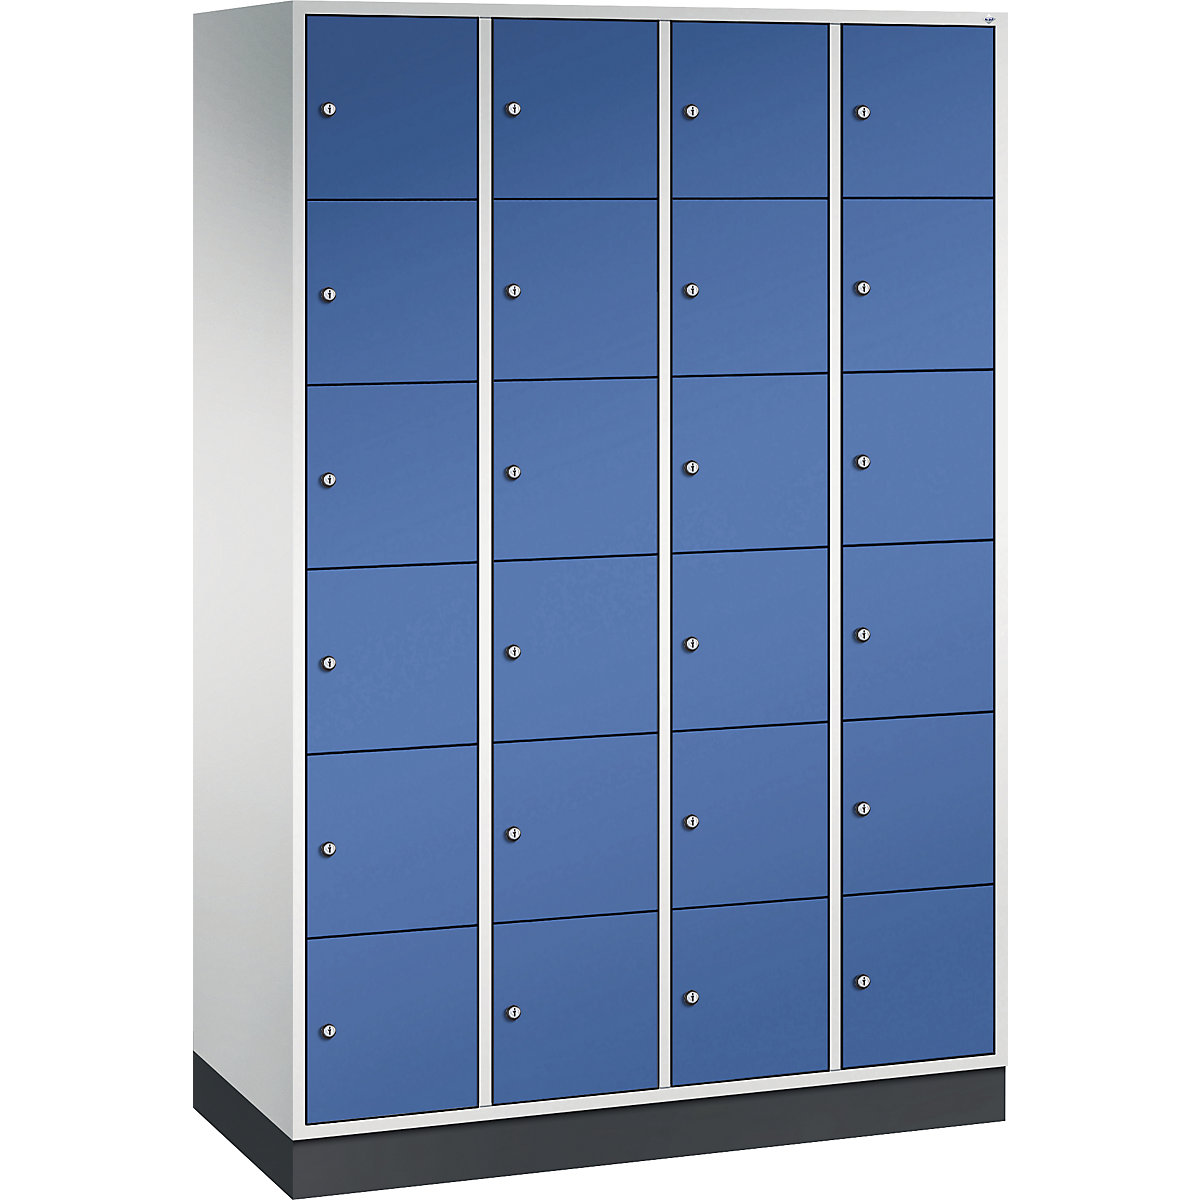 INTRO steel compartment locker, compartment height 285 mm – C+P, WxD 1220 x 500 mm, 24 compartments, light grey body, gentian blue doors-14